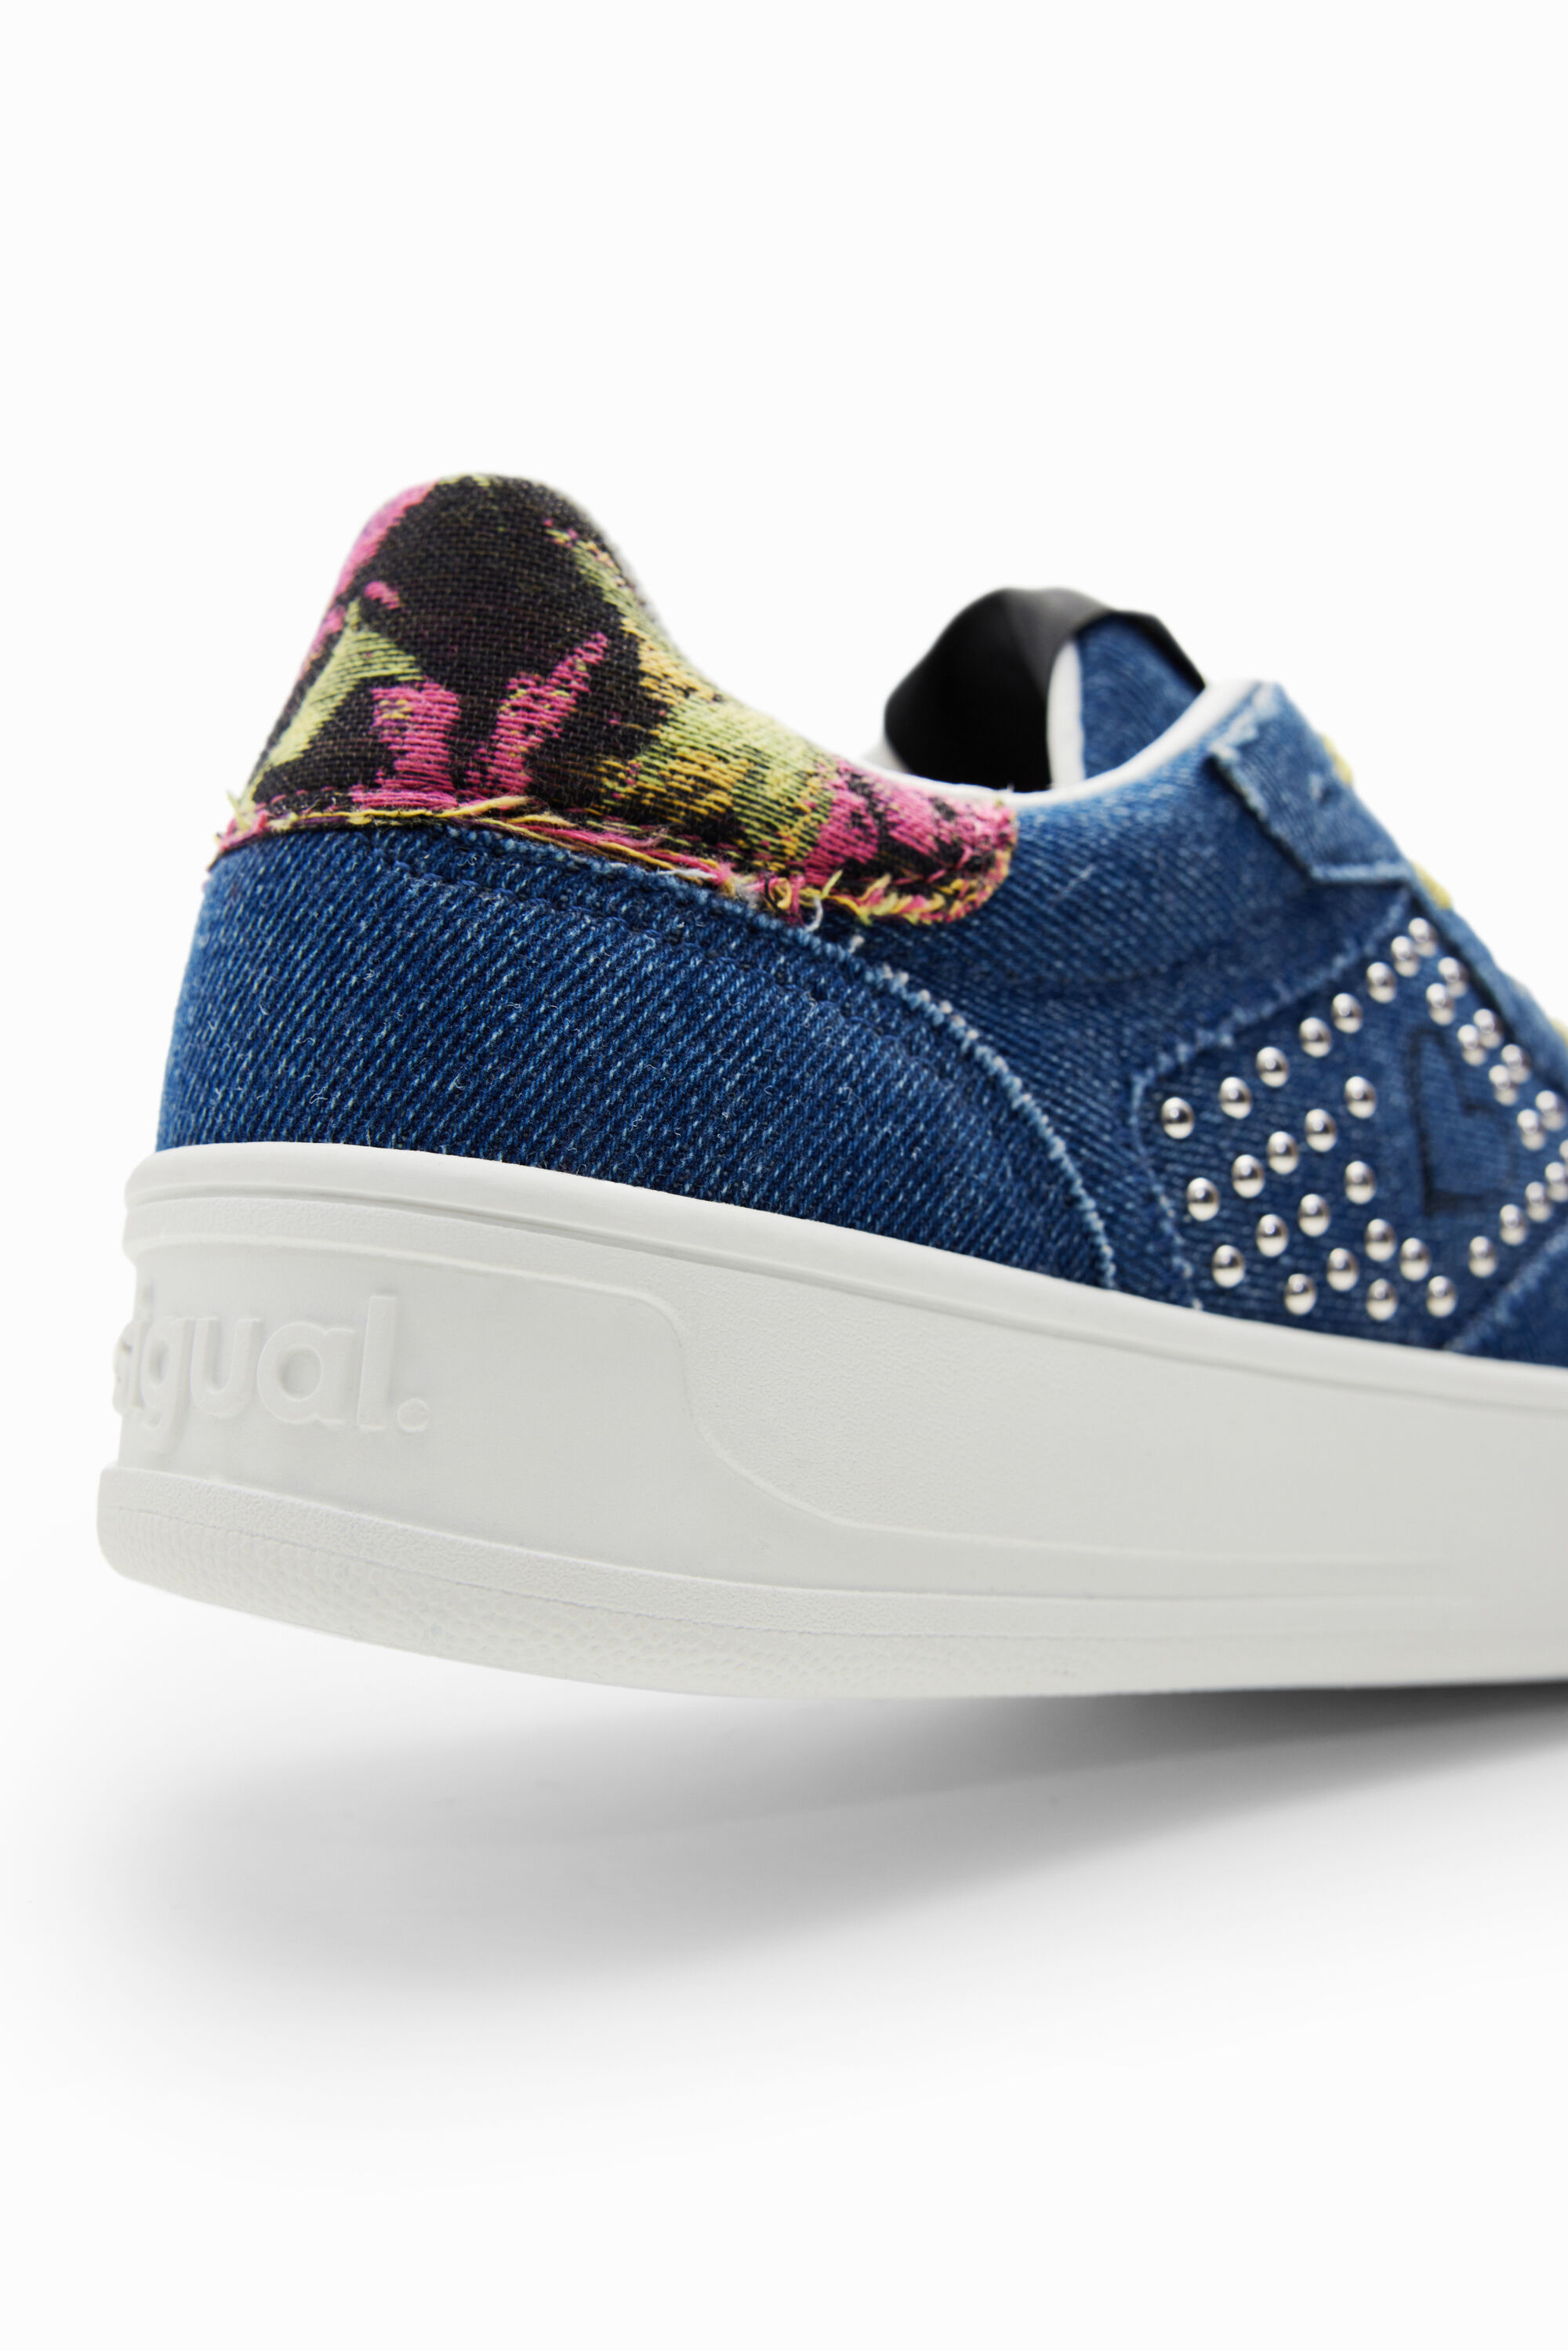 Desigual DENIM baby blue heart and studs sneakers / running shoes. $205. FW2023.